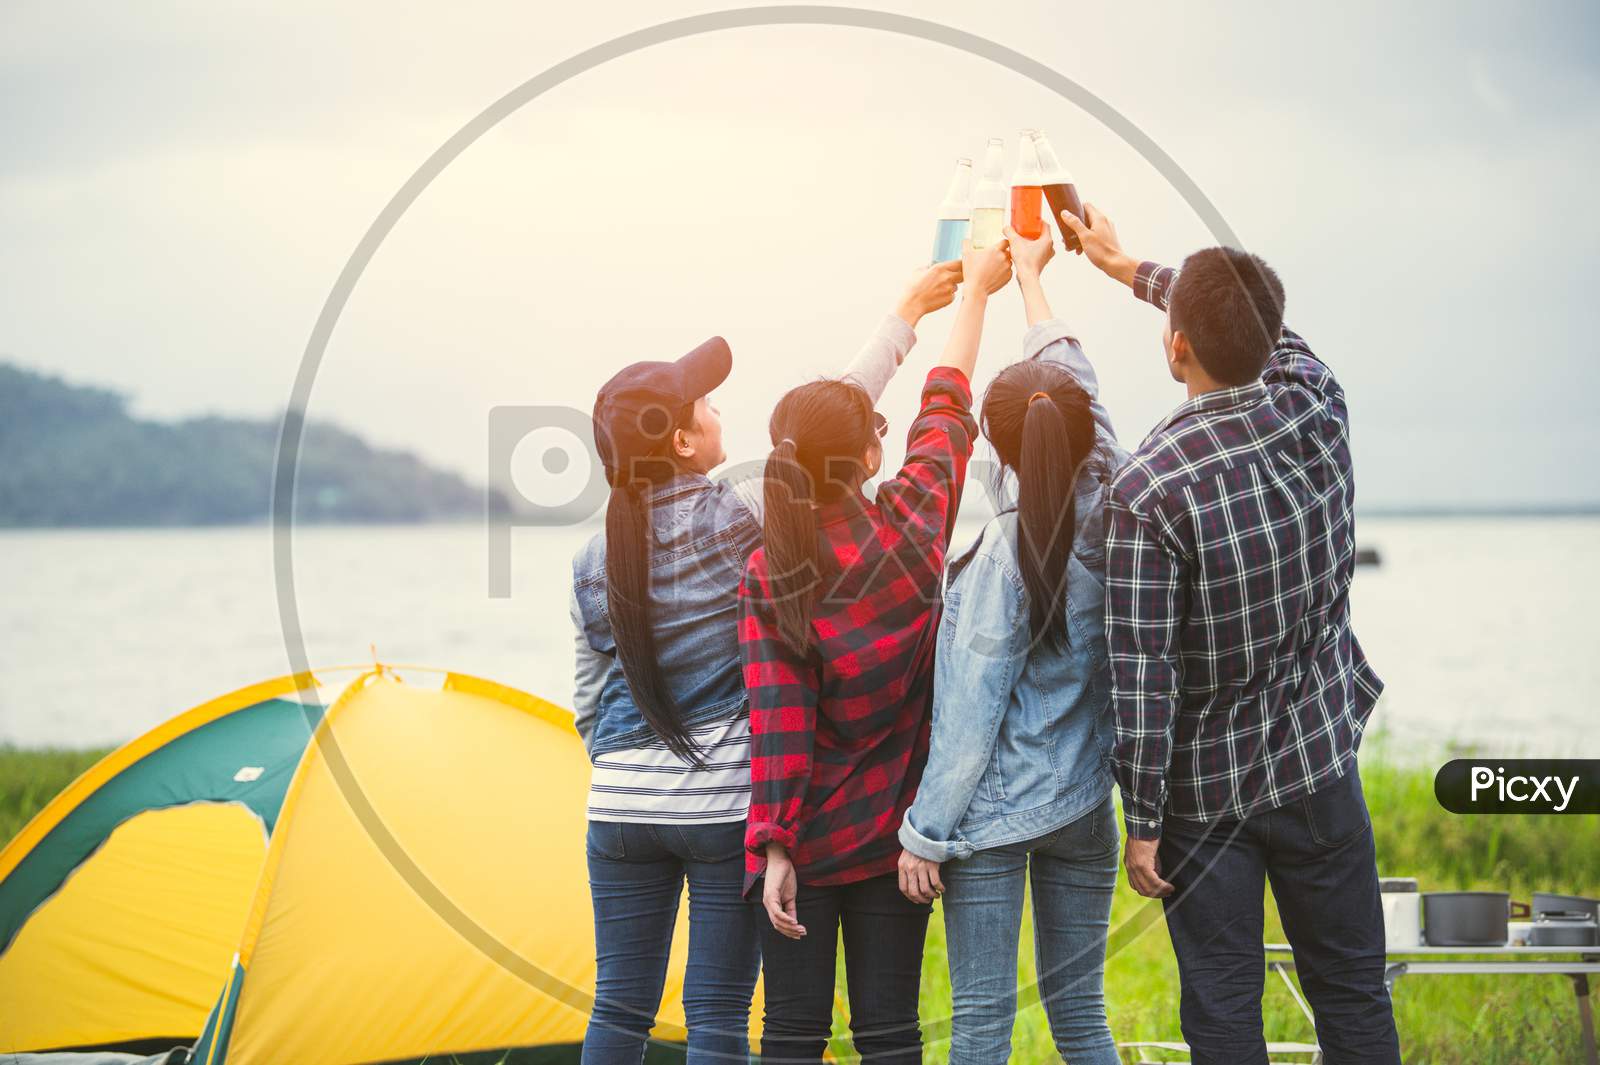 Back View Of Friendship Clinking Drinking Bottle Glass For Celebrating In Private Party With Mountain And Lake View Background. People Lifestyle And Travel On Vacation Concept. Picnic And Camping Tent